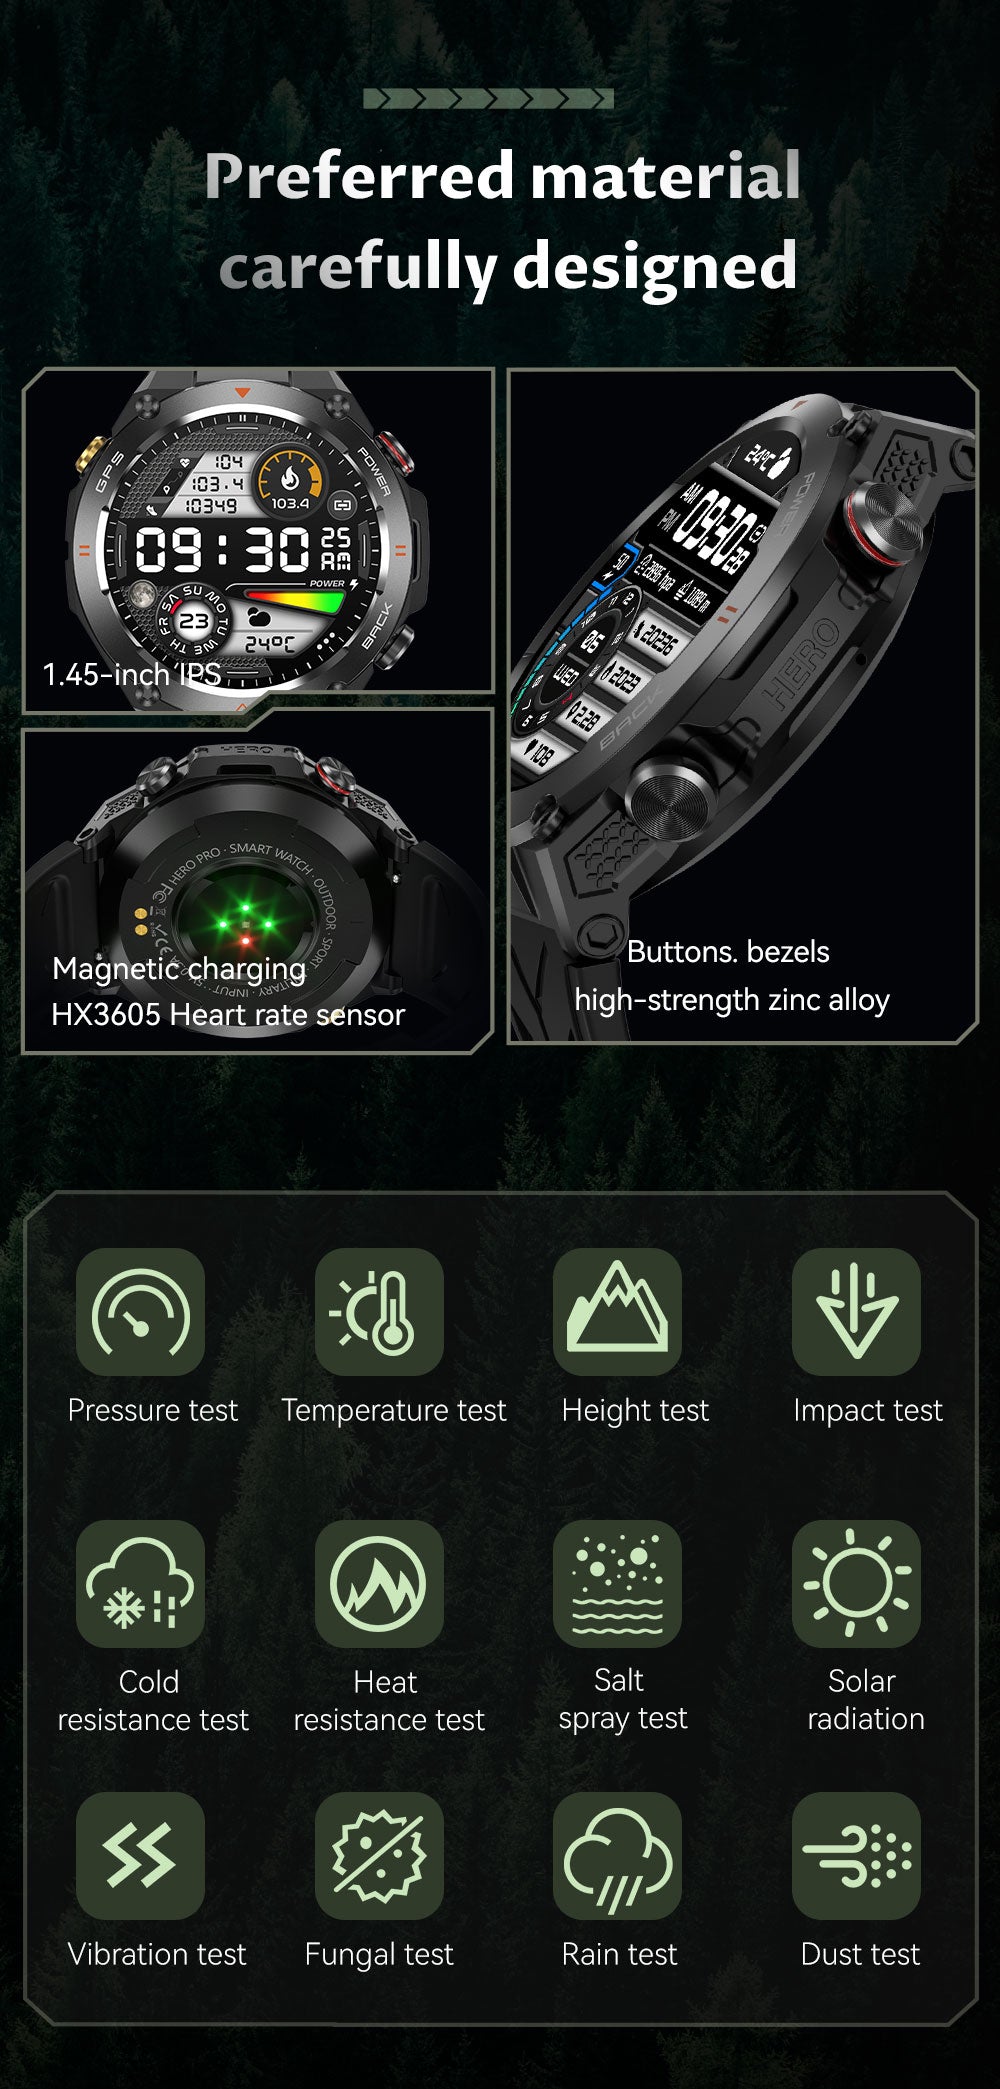 【SACOSDING】Military Smart Watches for Men, 5ATM Waterproof Rugged Smart Watch with Bluetooth Call (Answer/Dial Call), 1.41” HD IP68 Fitness Tracker Watch with 100+ Sport Modes for Android/iOS Phone